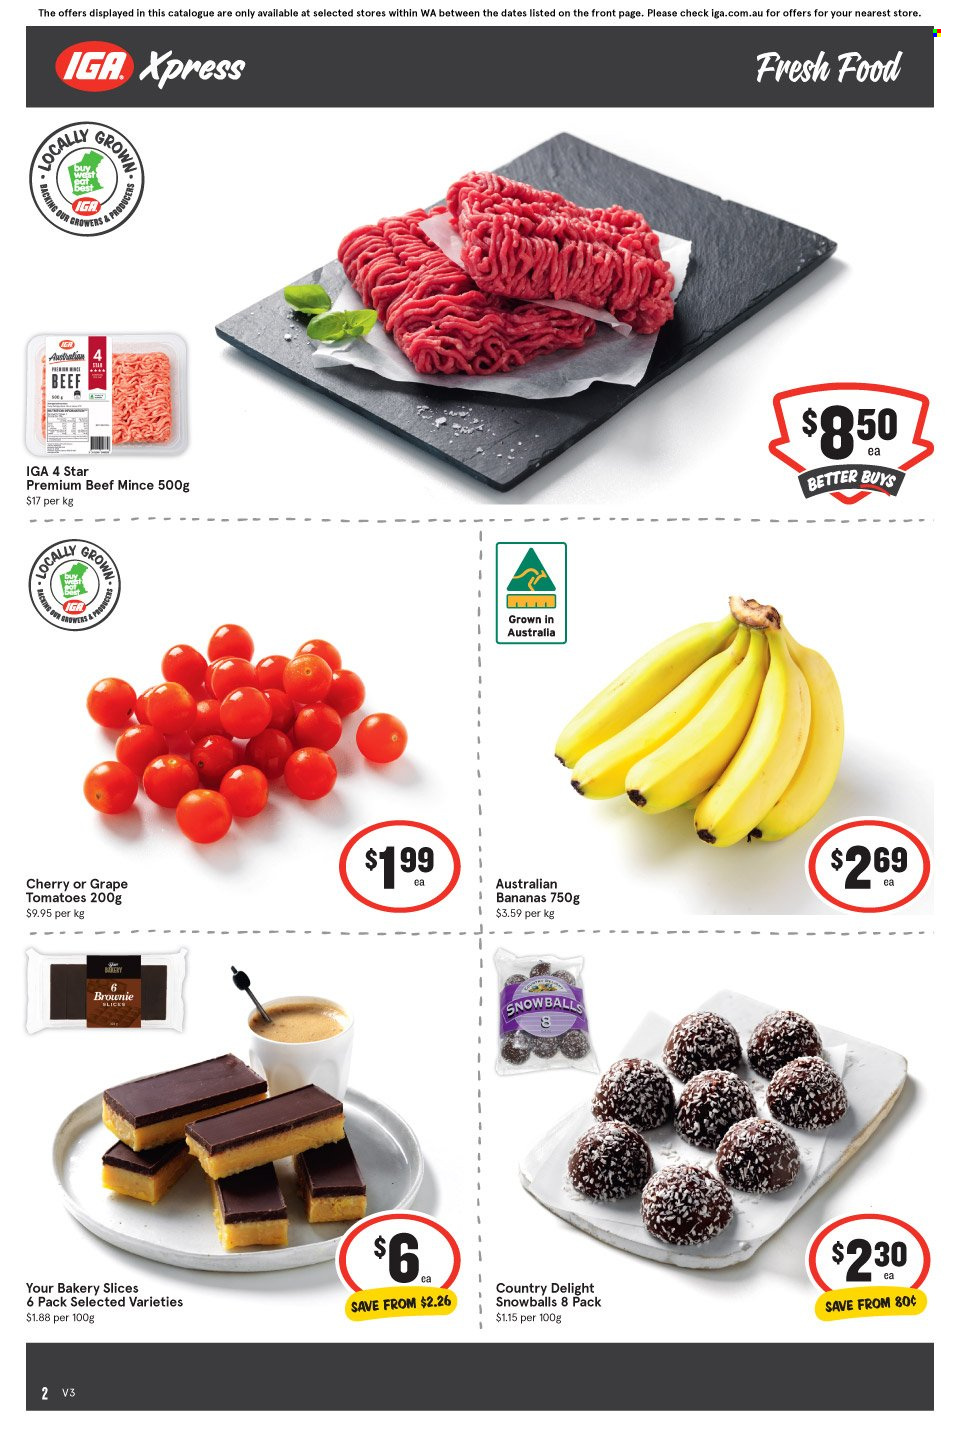 thumbnail - IGA Xpress Catalogue - 12 Jan 2022 - 18 Jan 2022 - Sales products - brownies, tomatoes, bananas, cherries, beef meat, ground beef. Page 2.